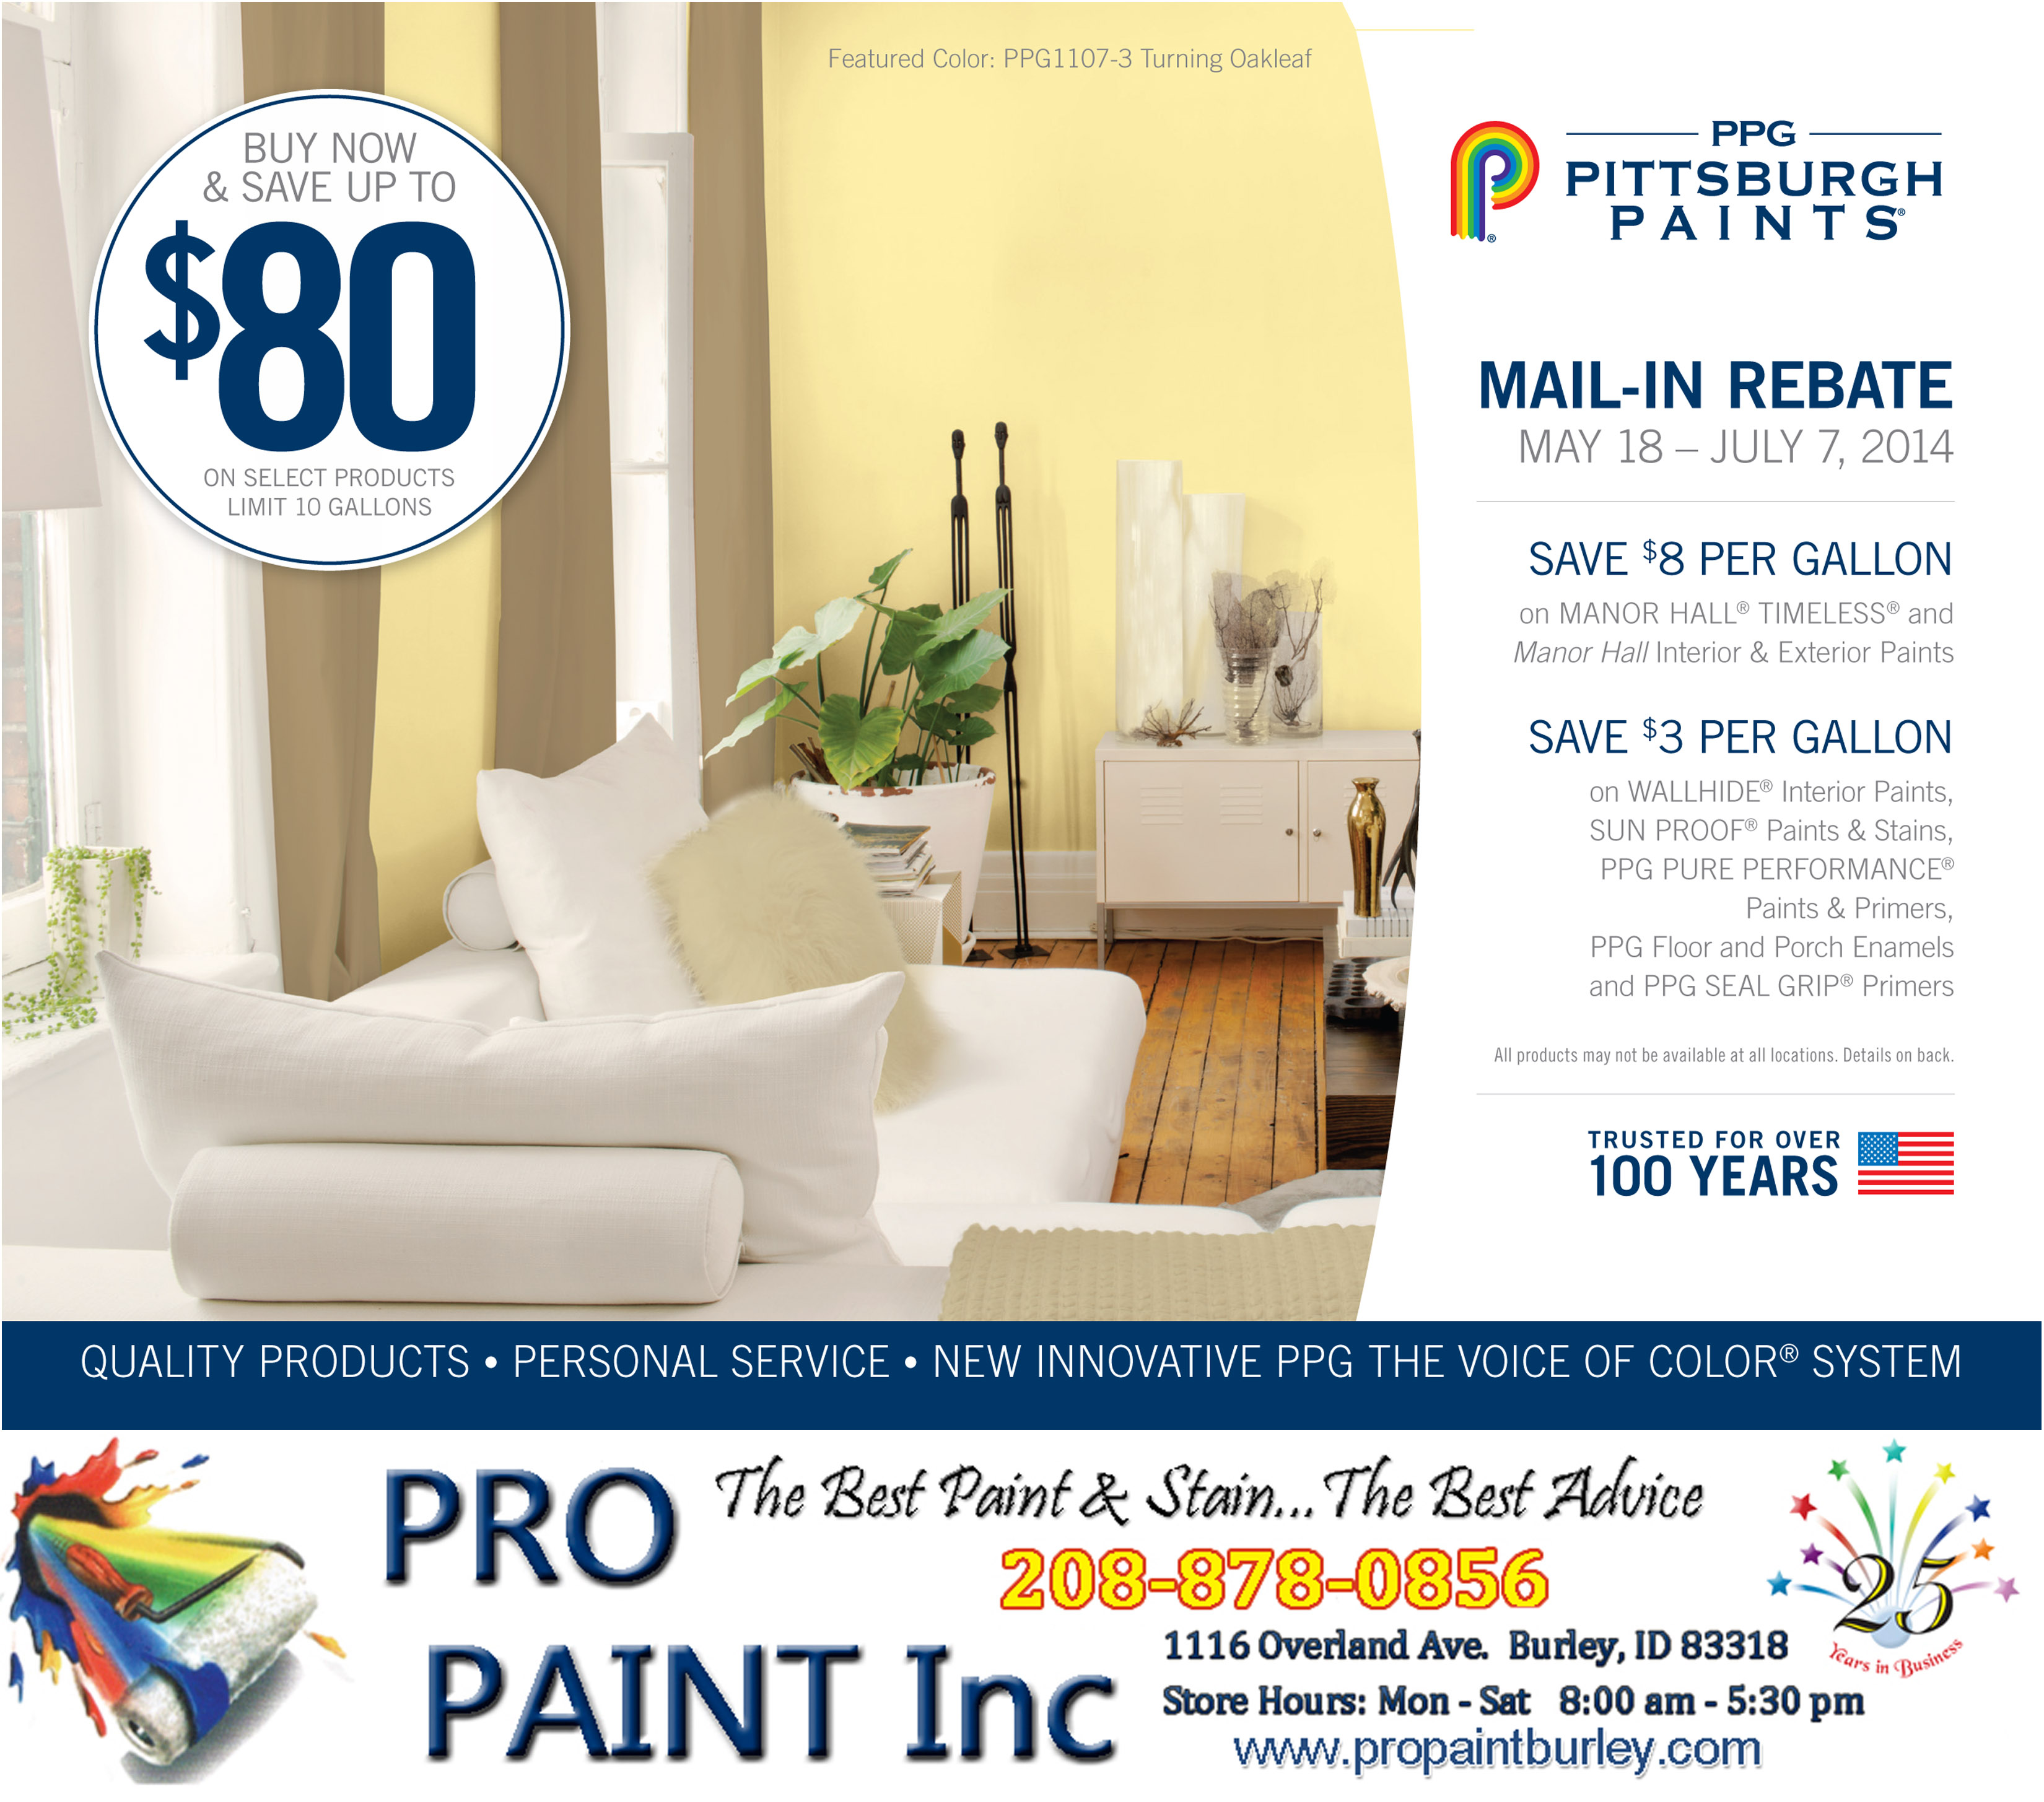 ppg-rebates-save-up-to-80-pro-paint-inc